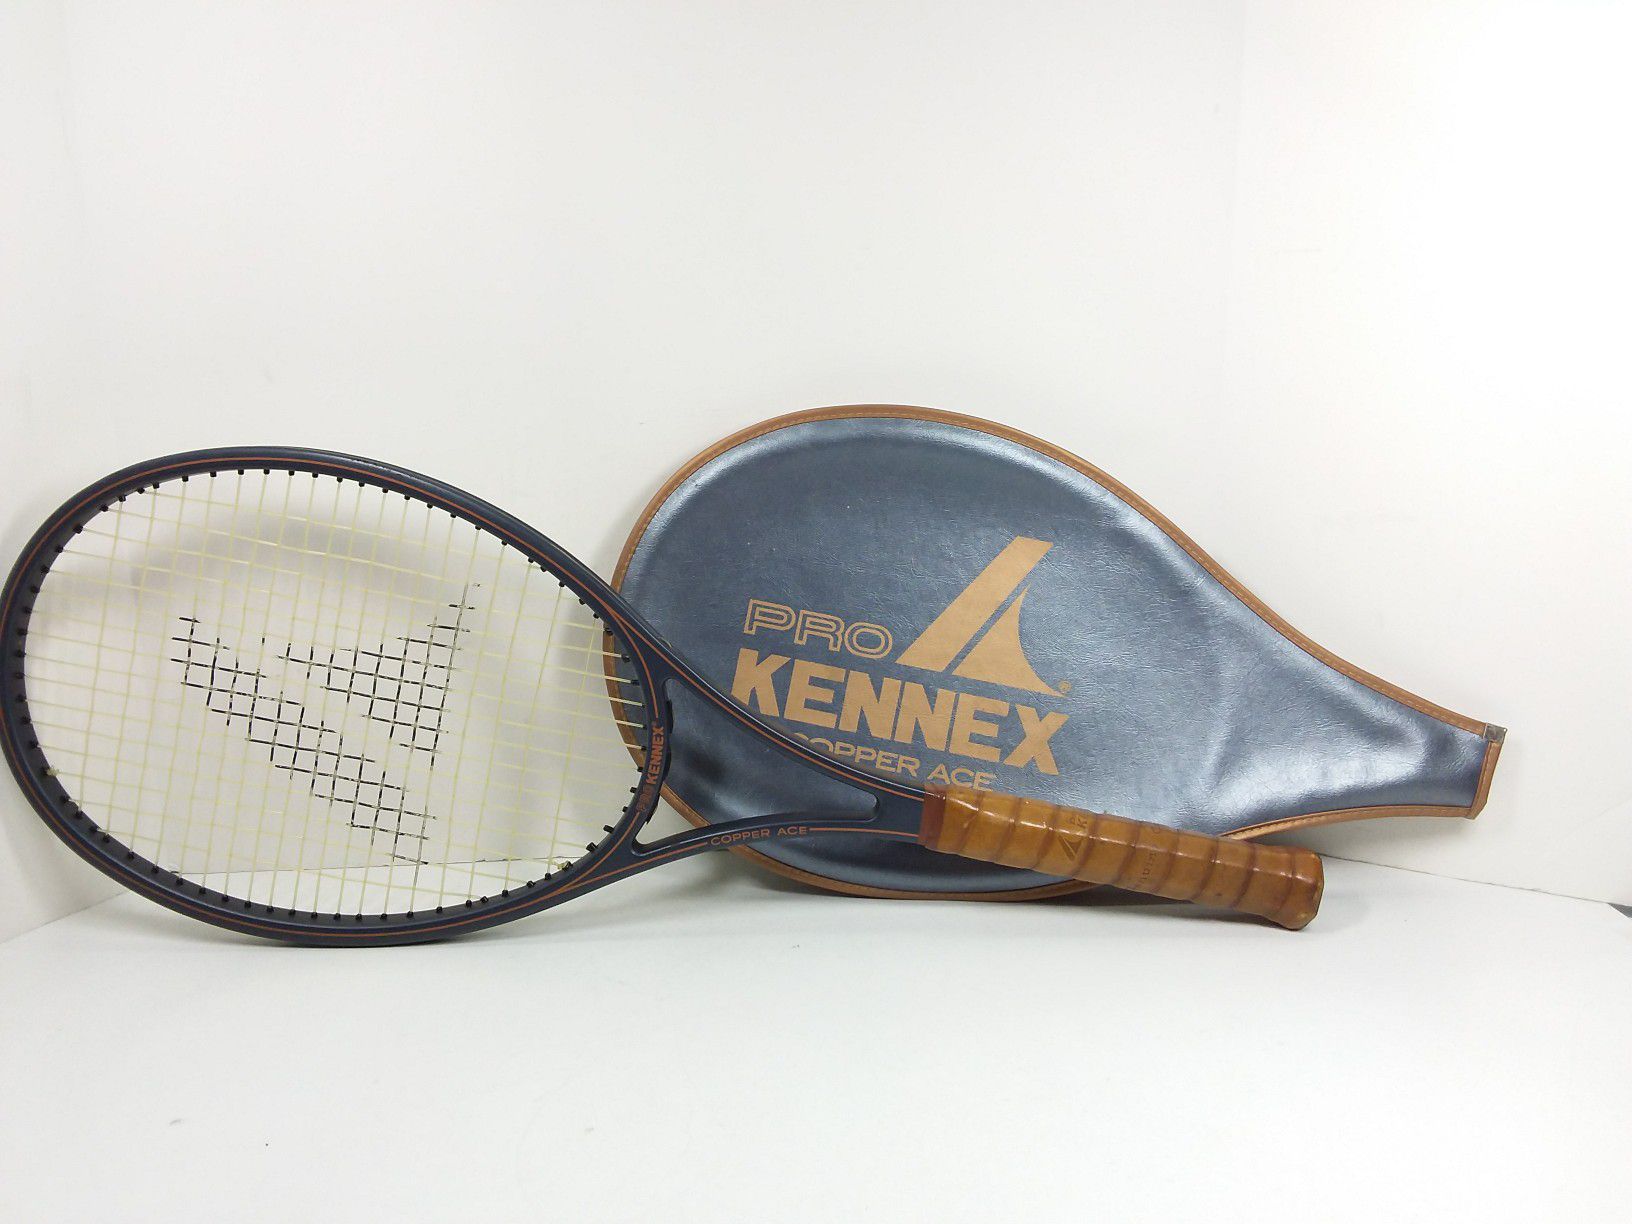 Pro Kennex Copper Ace Tennis Racket w/ Cover